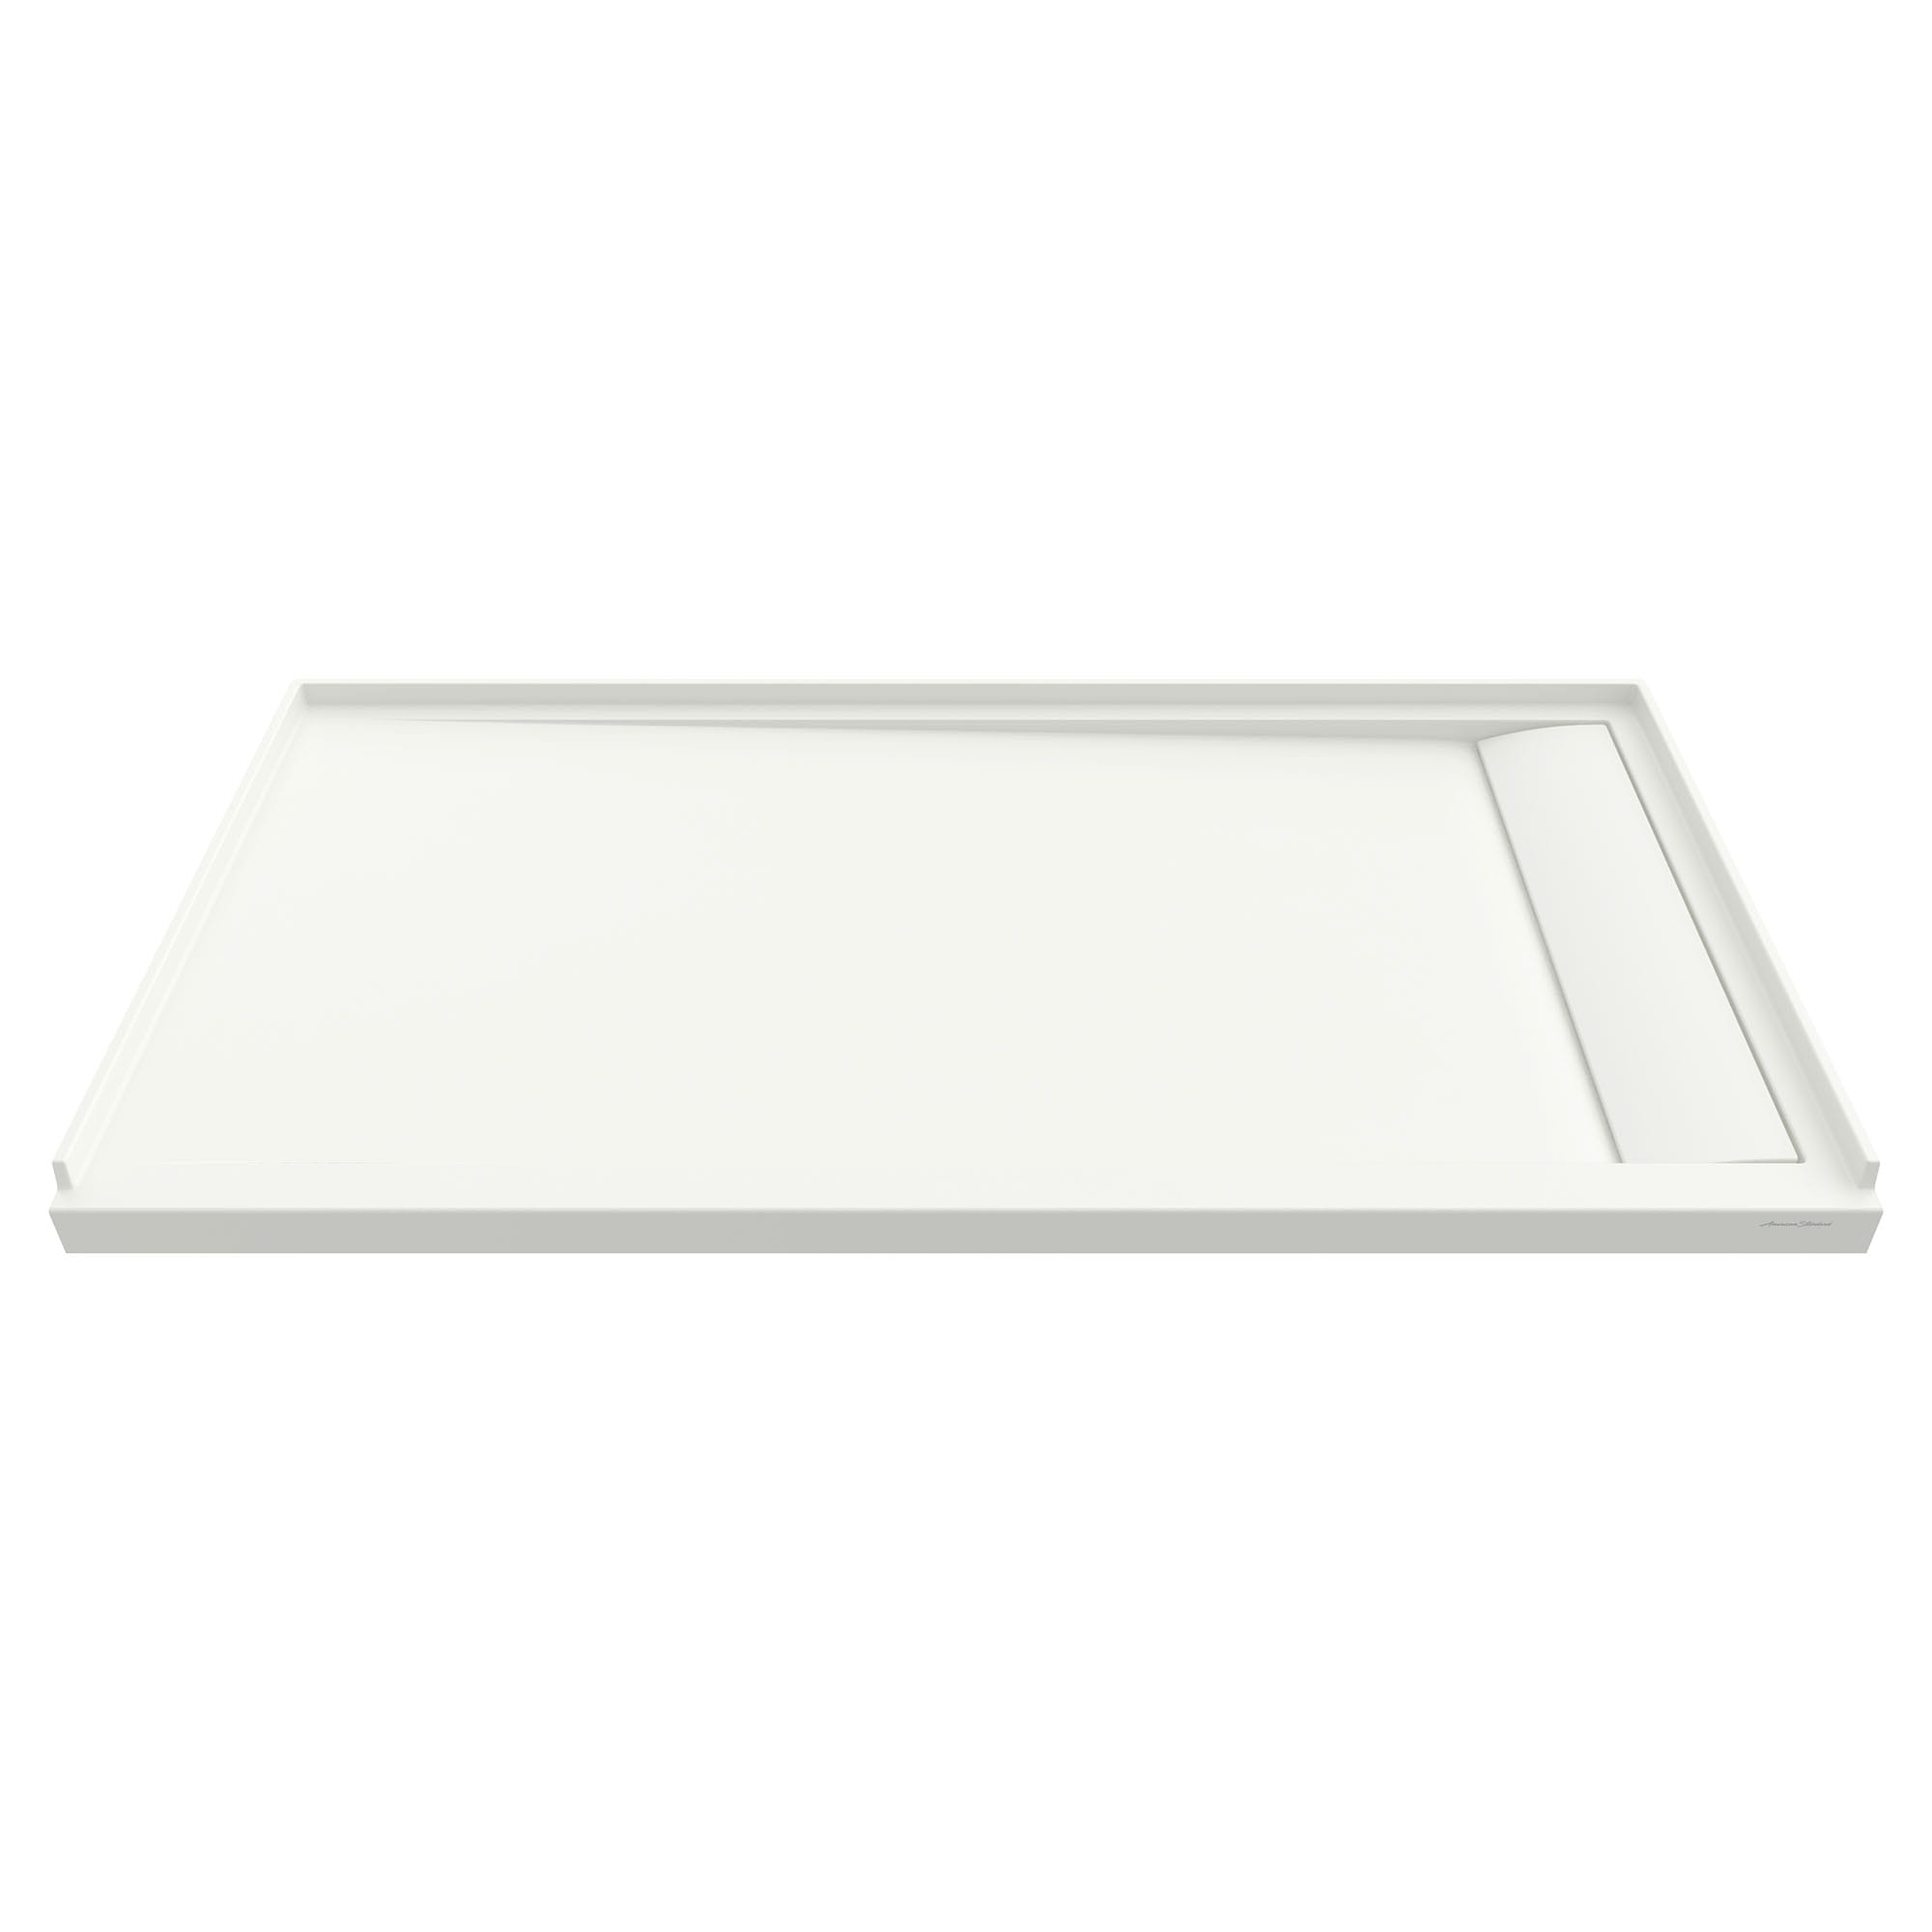 Townsend 60 x 32 Inch Single Threshold Shower Base With Right Hand Outlet SOFT WHITE